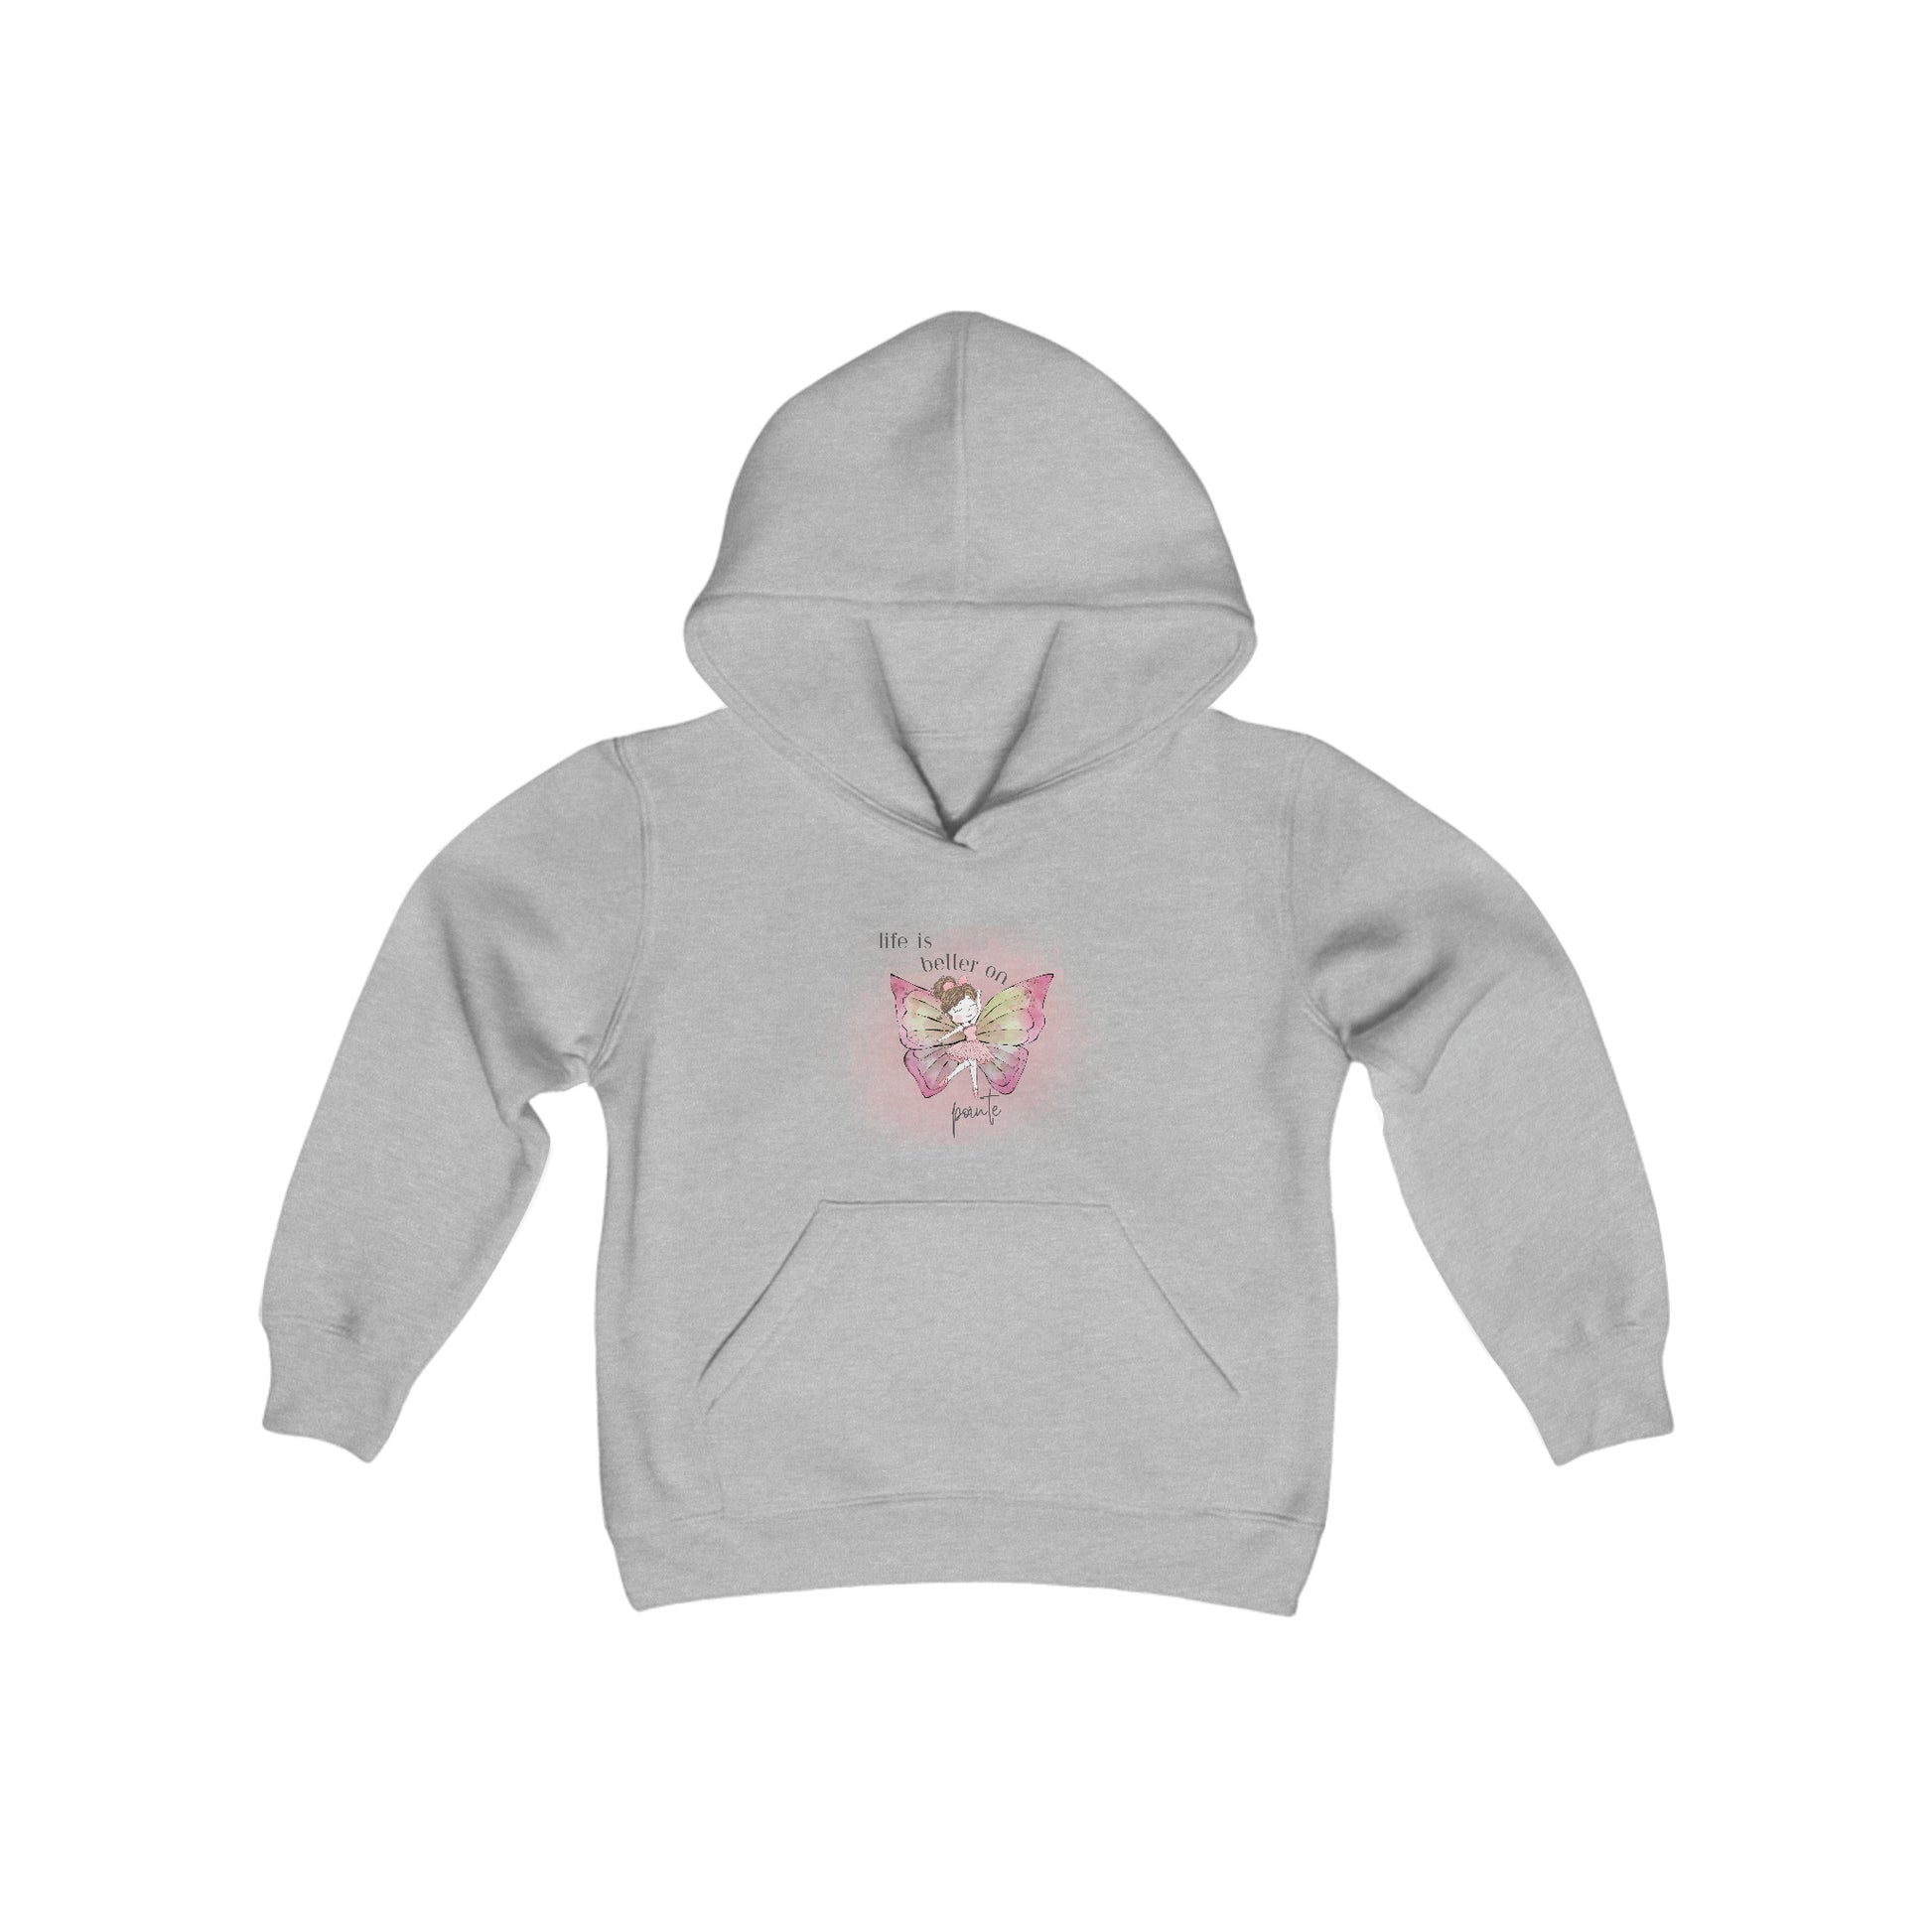 Youth Hooded Sweatshirt - Ballerina With Butterfly Wings - gray